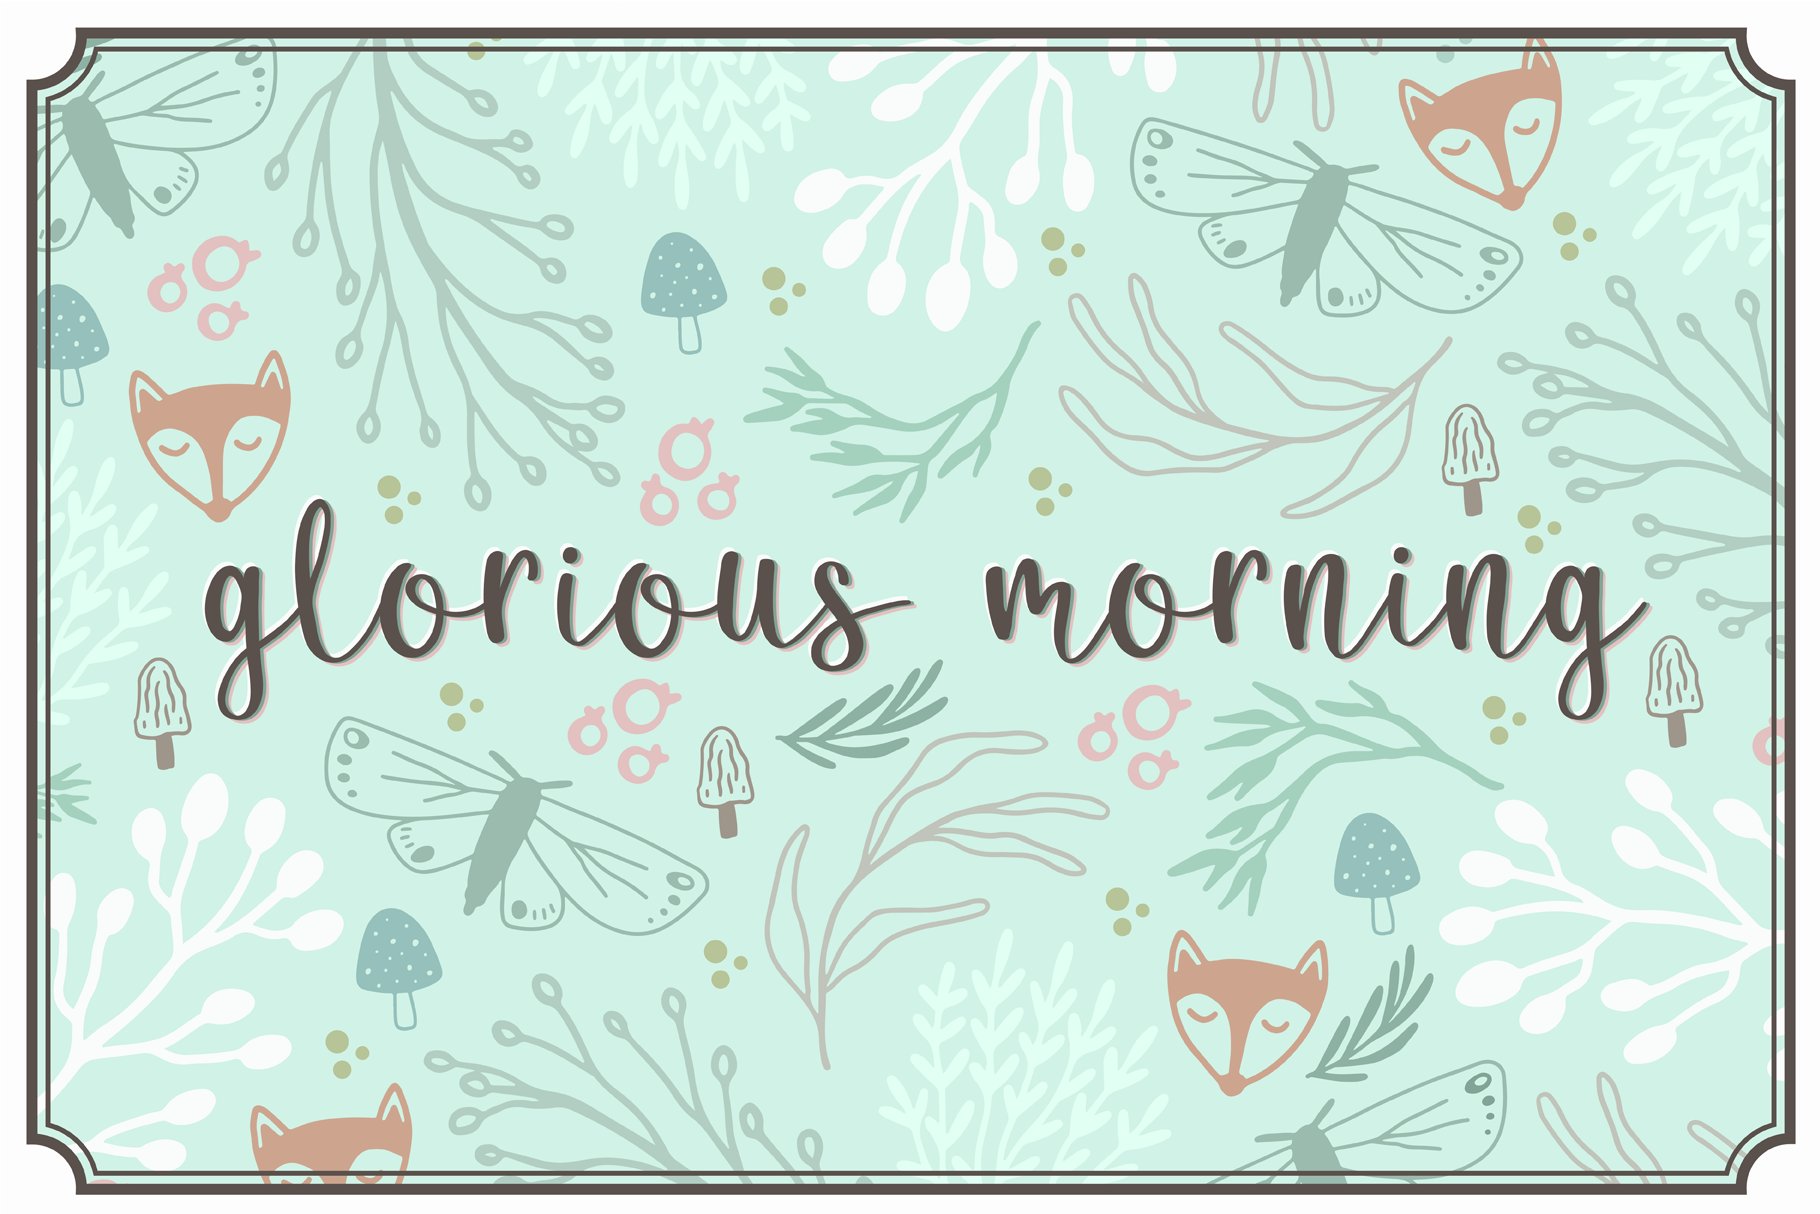 Glorious Morning: A Whimsical Font cover image.